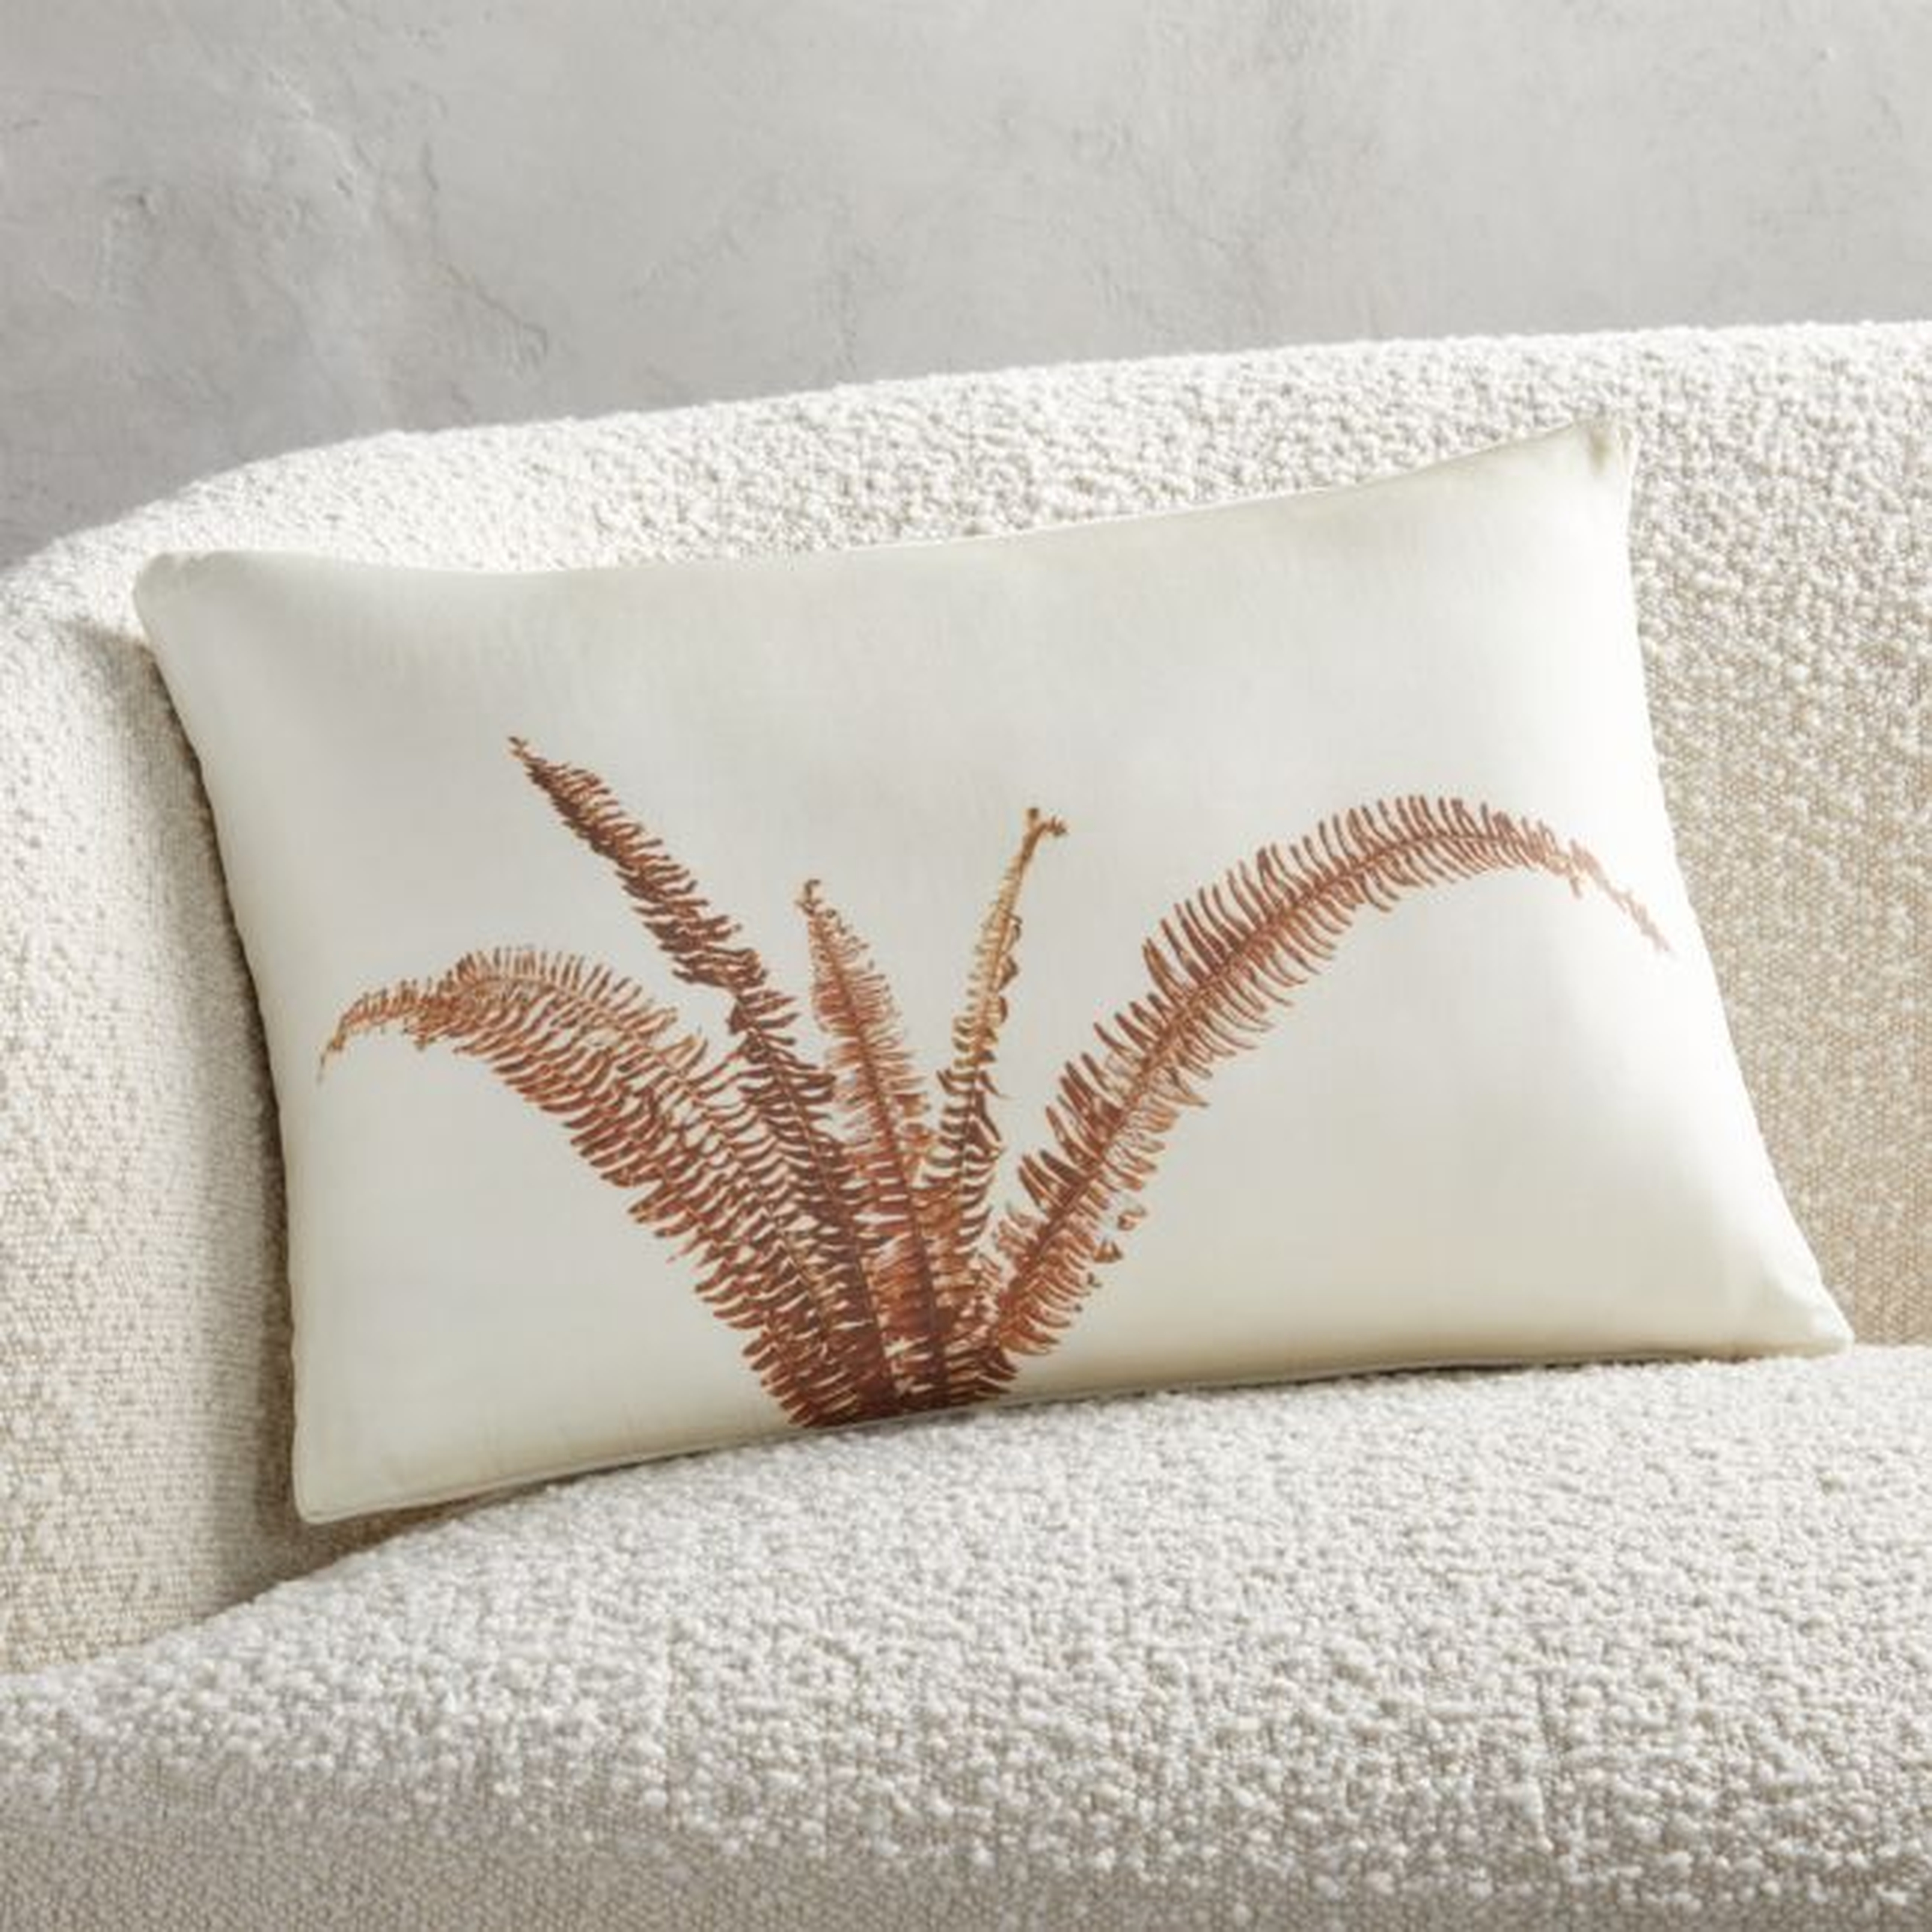 18"x12" Tansy Leaf Pillow with Feather-Down Insert - CB2